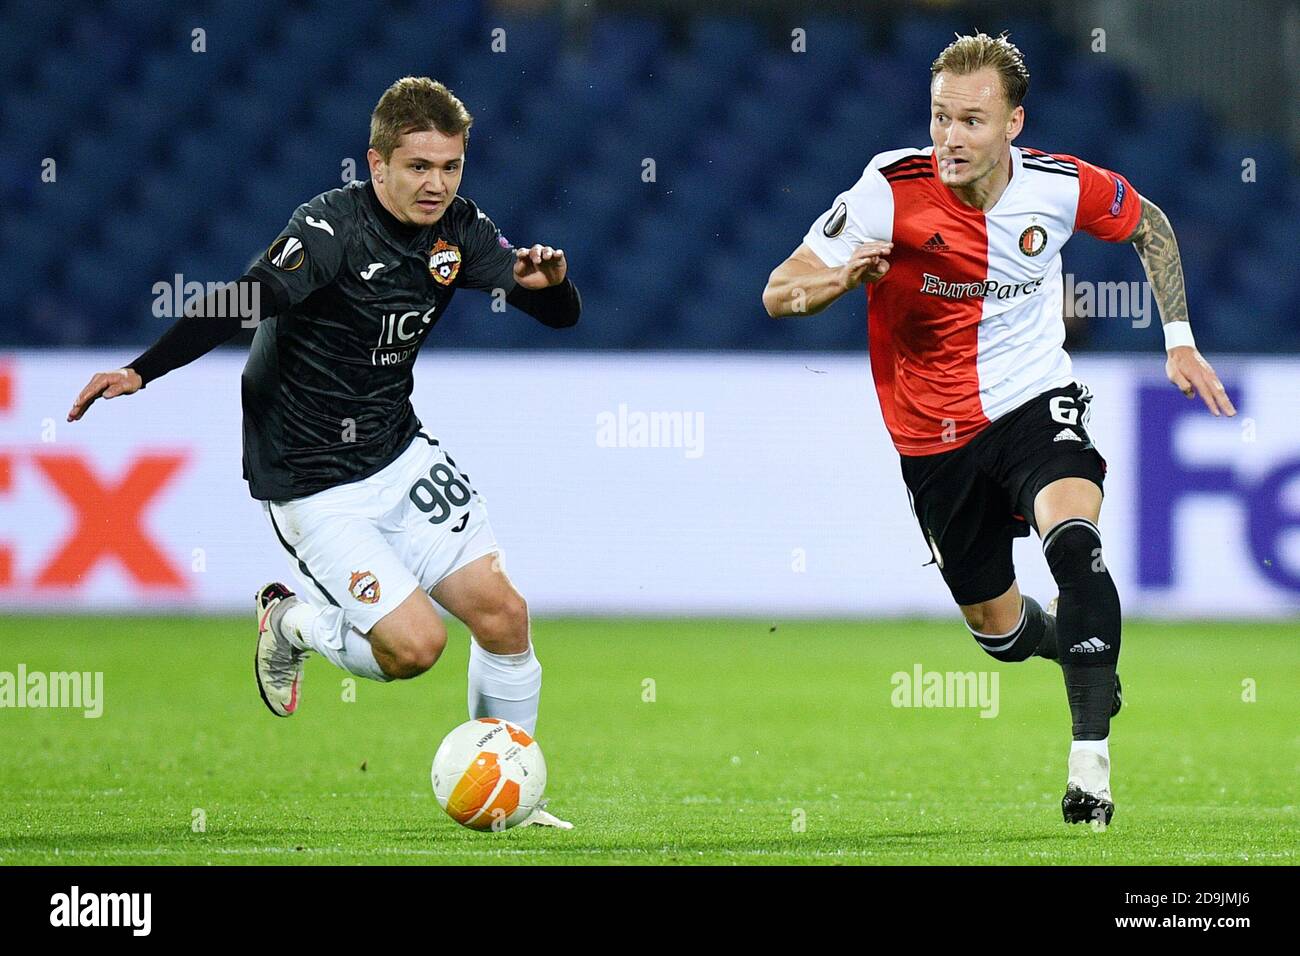 Rotterdam, The Netherlands. 5th Nov, 2020. Ivan Oblyakov of CSKA Moskva, Mark Diemers of Feyenoord during the UEFA Europa League, Group Stage, Group K football match between Feyenoord and CSKA Moskva on november 5, 2020 at De Kuip stadium in Rotterdam, The Netherlands - Photo Yannick Verhoeven/Orange Pictures/DPPI/LM Credit: Paola Benini/Alamy Live News Stock Photo